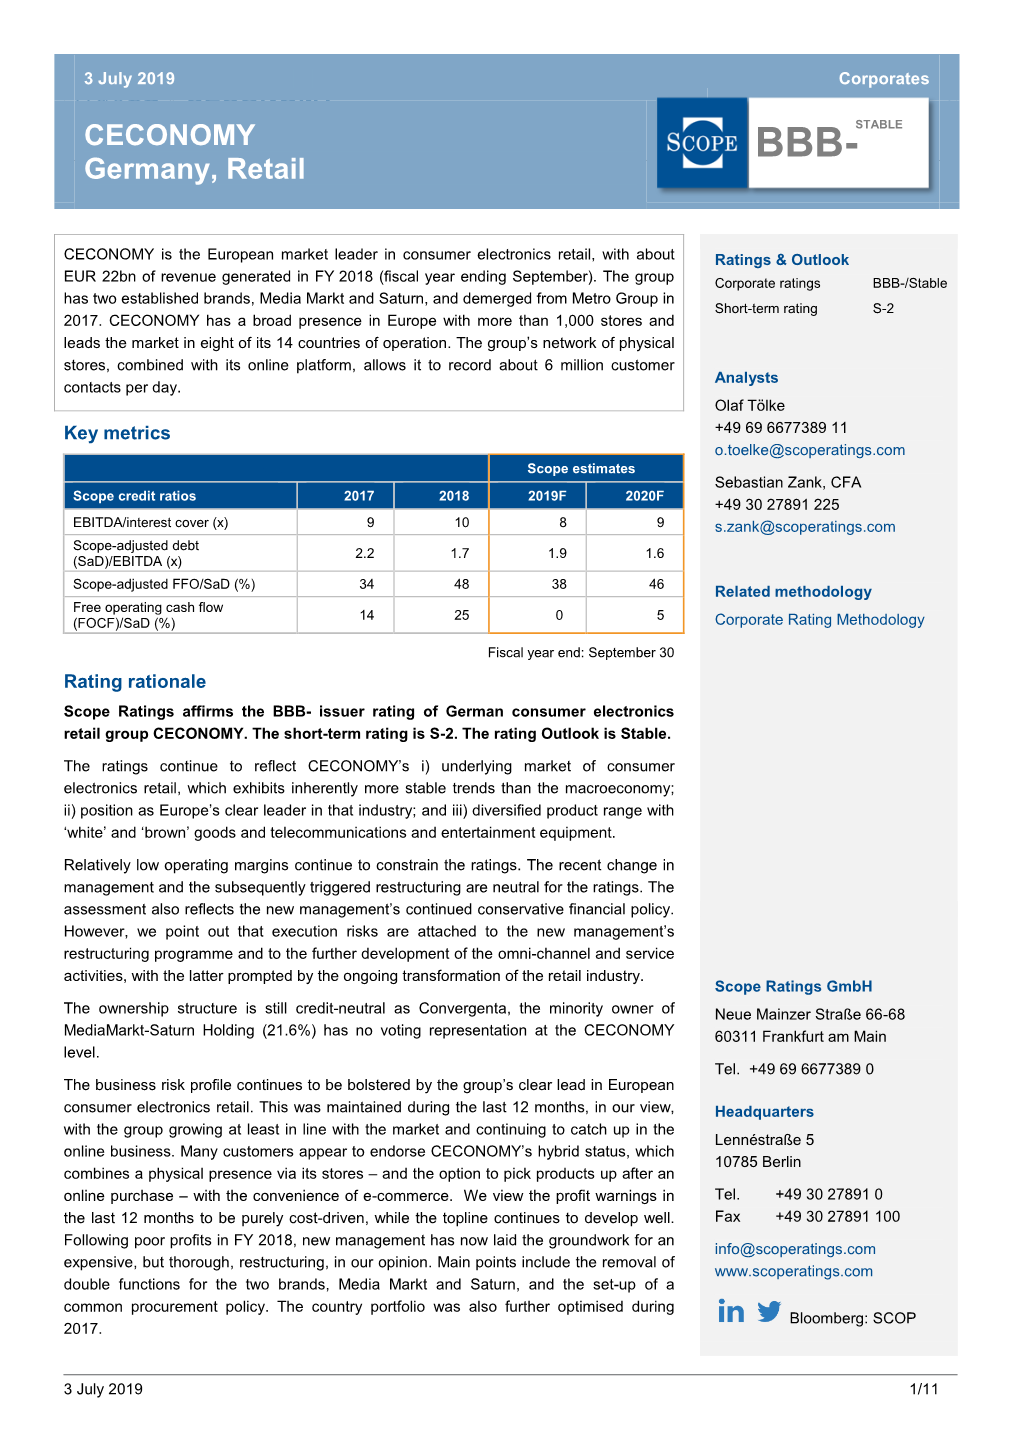 Rating Report, July 2019